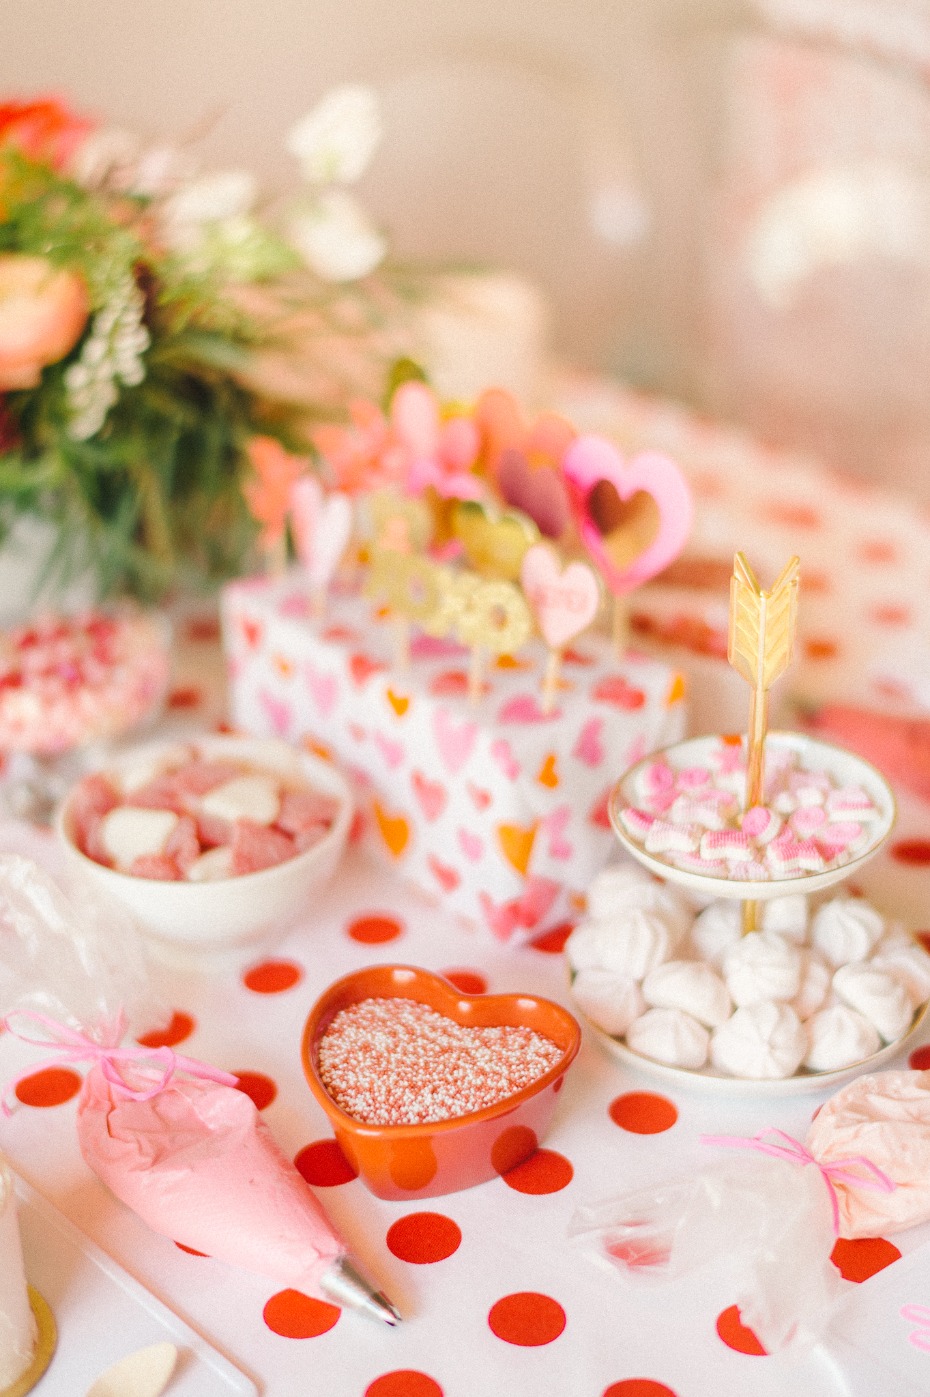 candy and sweets cake decoration table